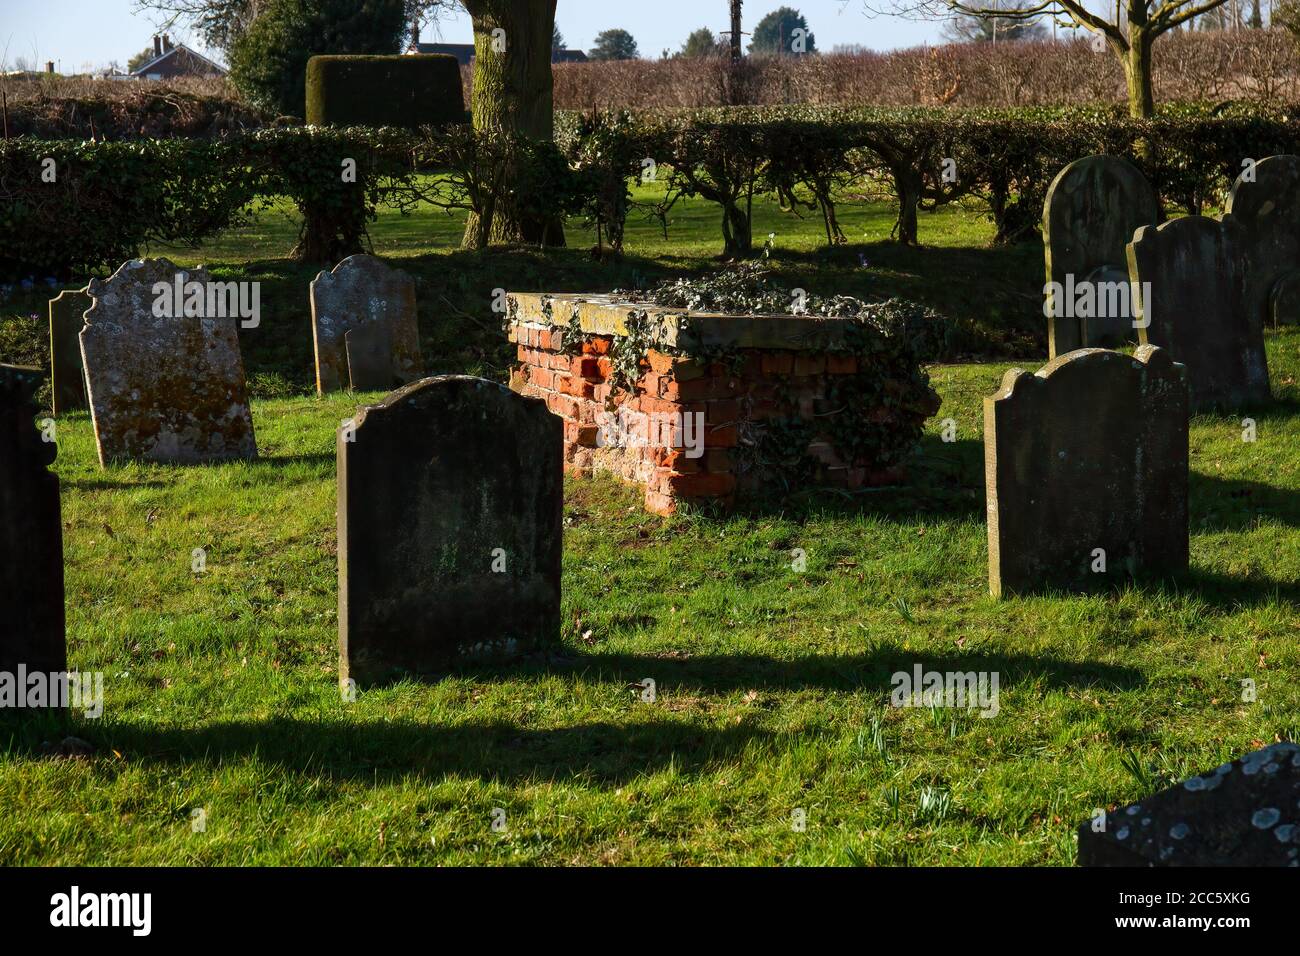 Brick tomb, Ivy covered in rural graveyard. Gt Yarmouth, Norfolk, UK - February 10th 2019 Stock Photo